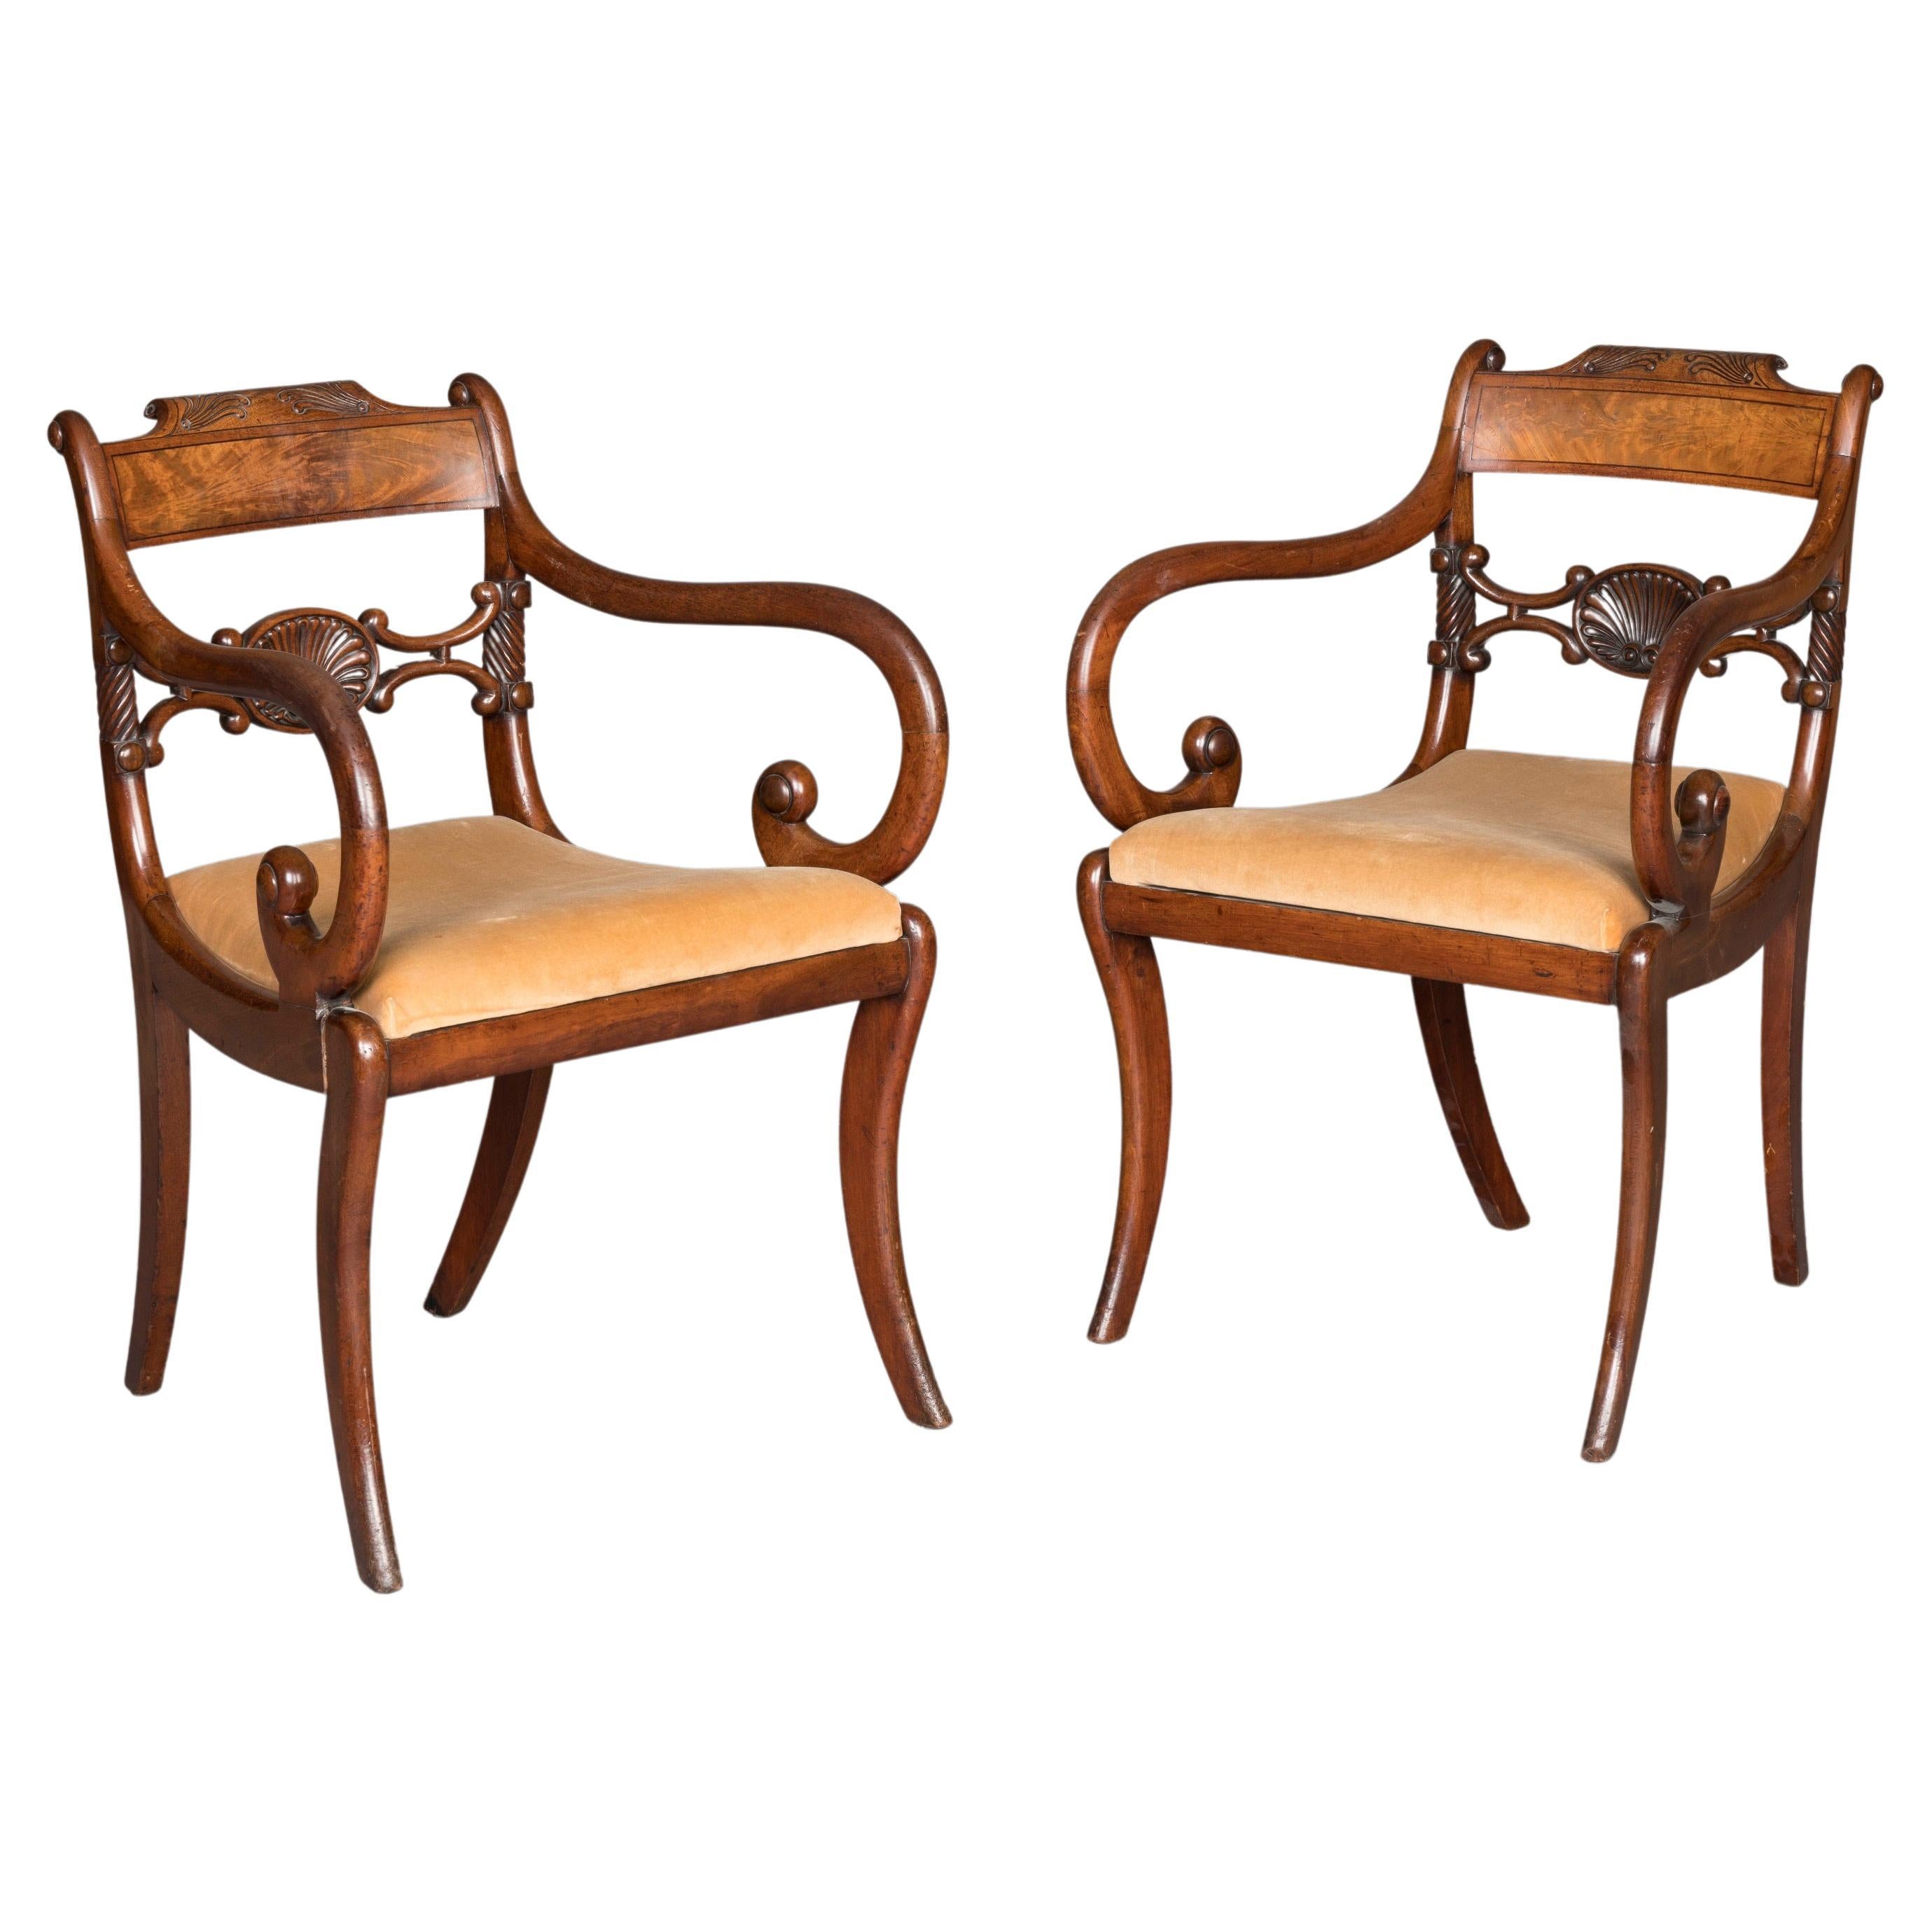 Early 19th Century English Regency Period Carved Mahogany Armchairs  For Sale